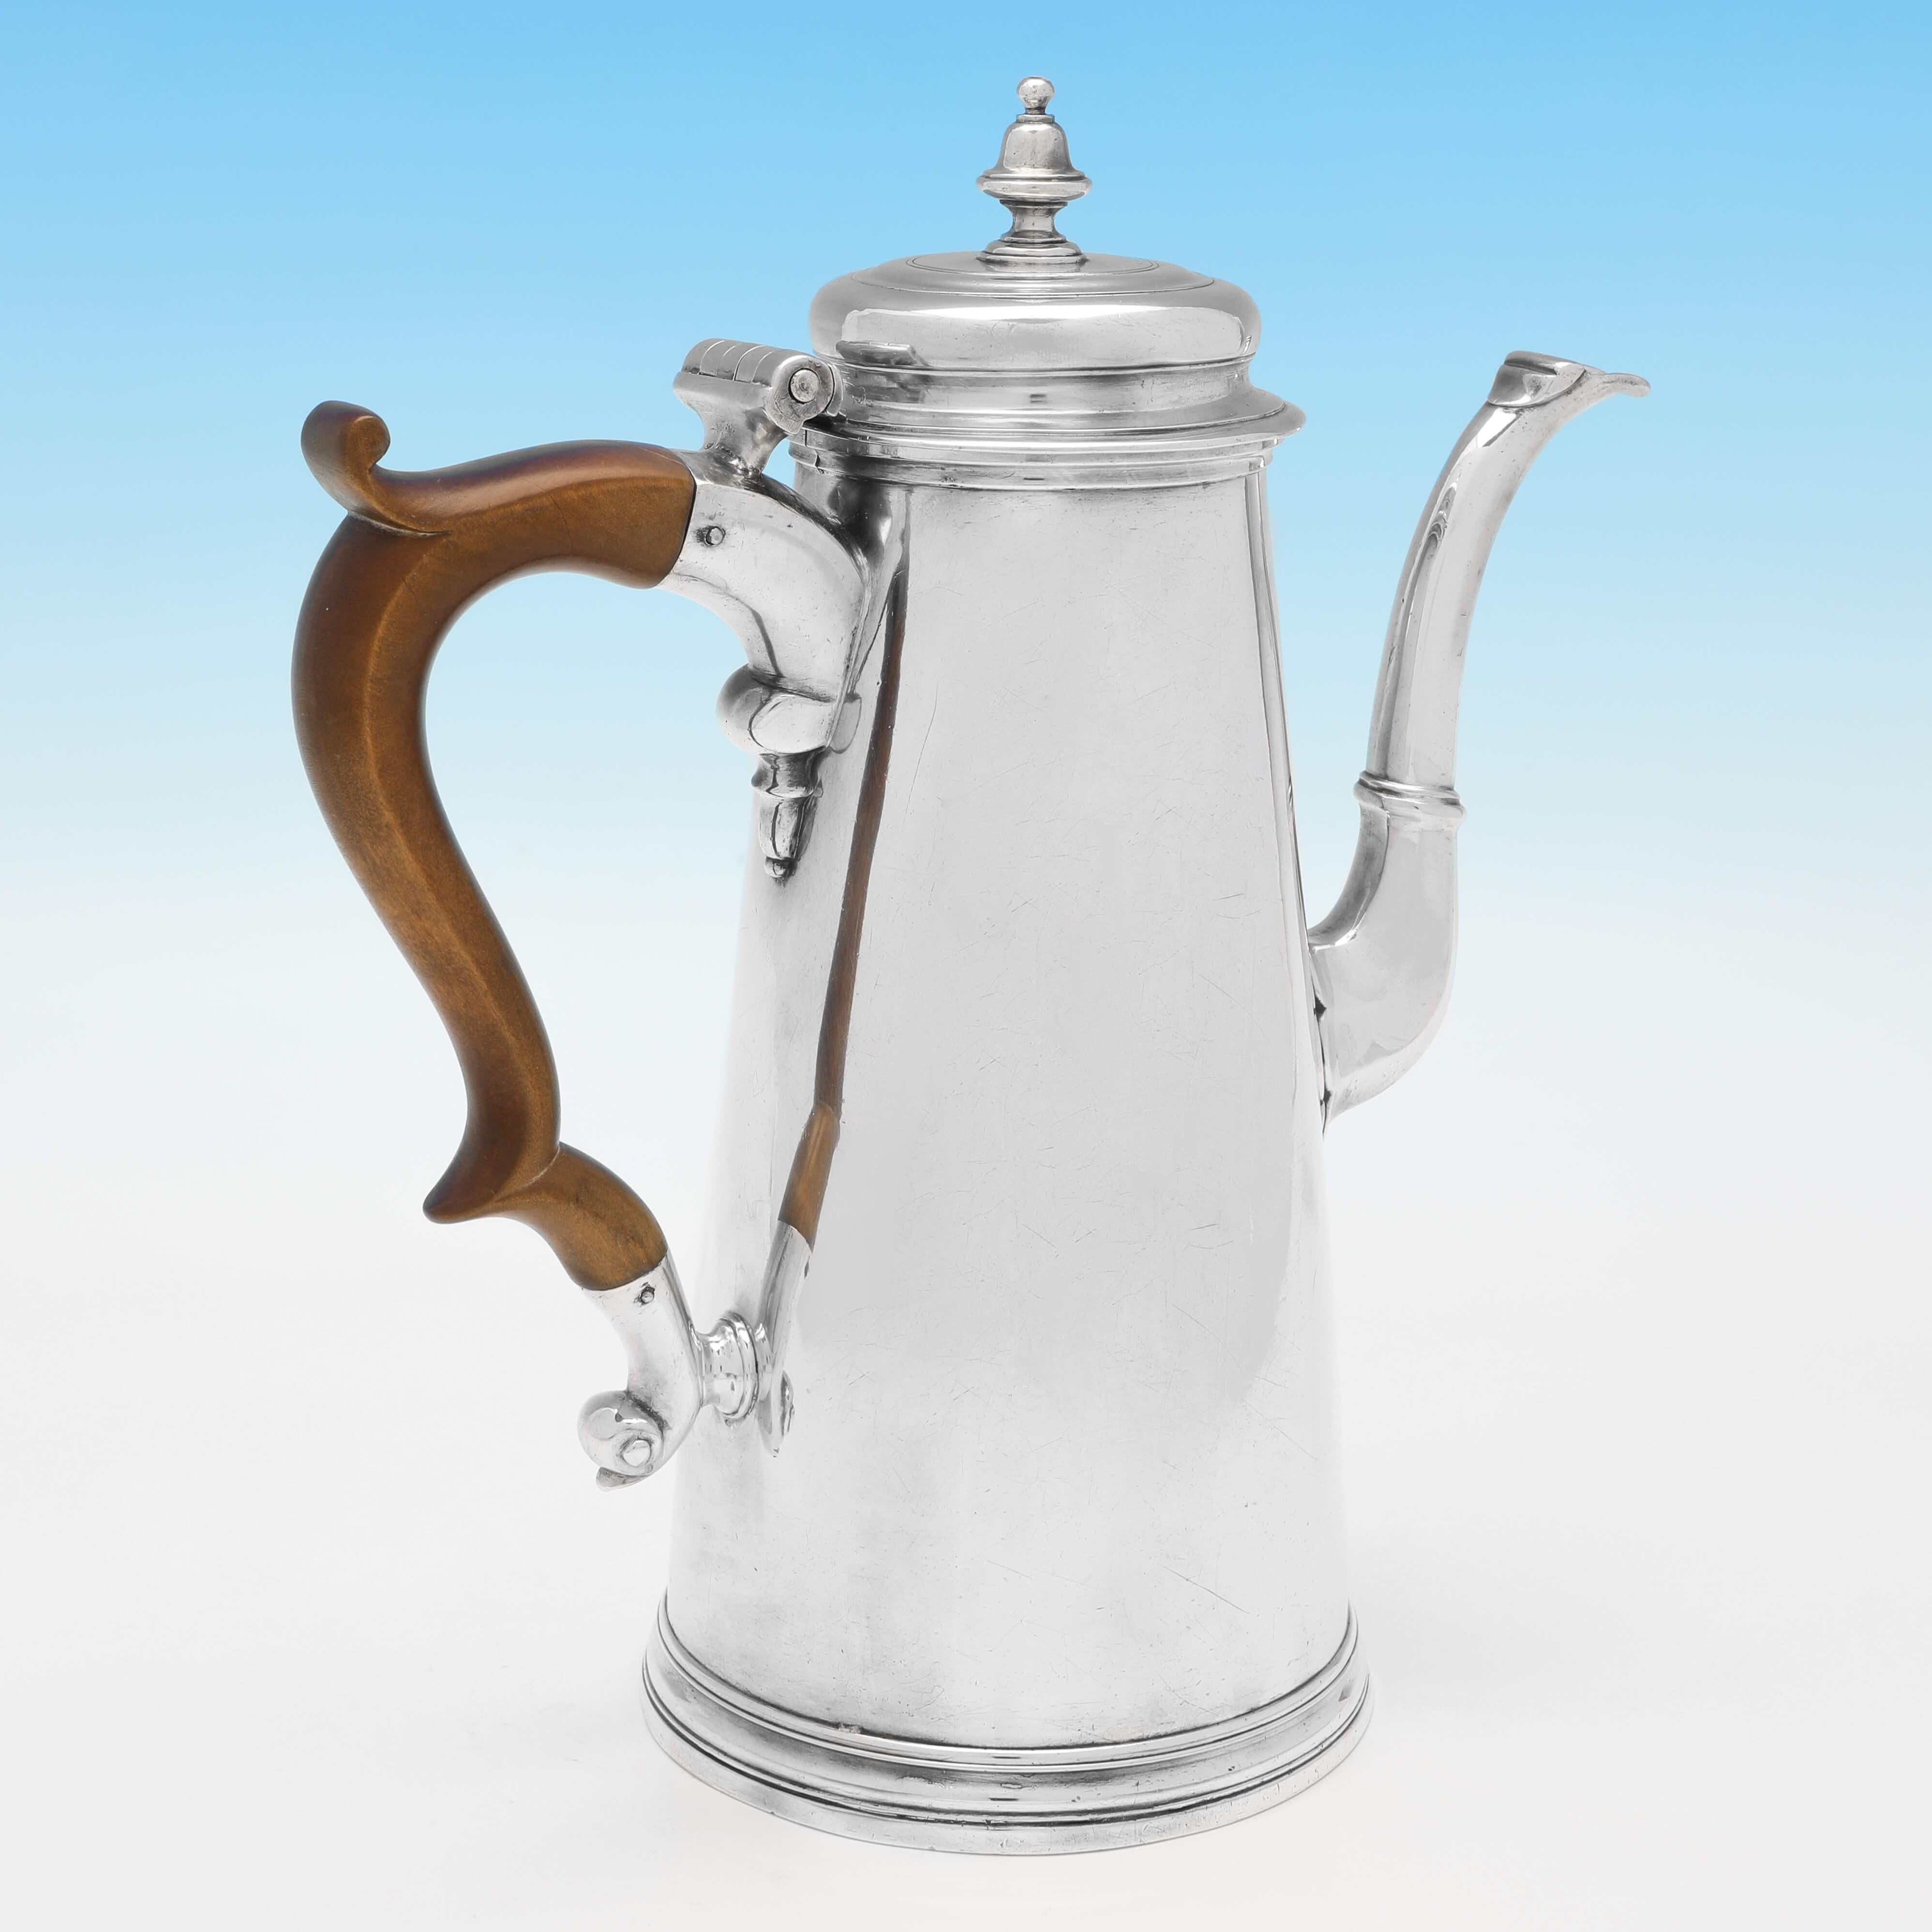 Hallmarked in London in 1733 by Thomas Farren, this handsome, George II Antique Sterling Silver Coffee Pot is straight sided with reed borders. The coffee pot measures 9.25